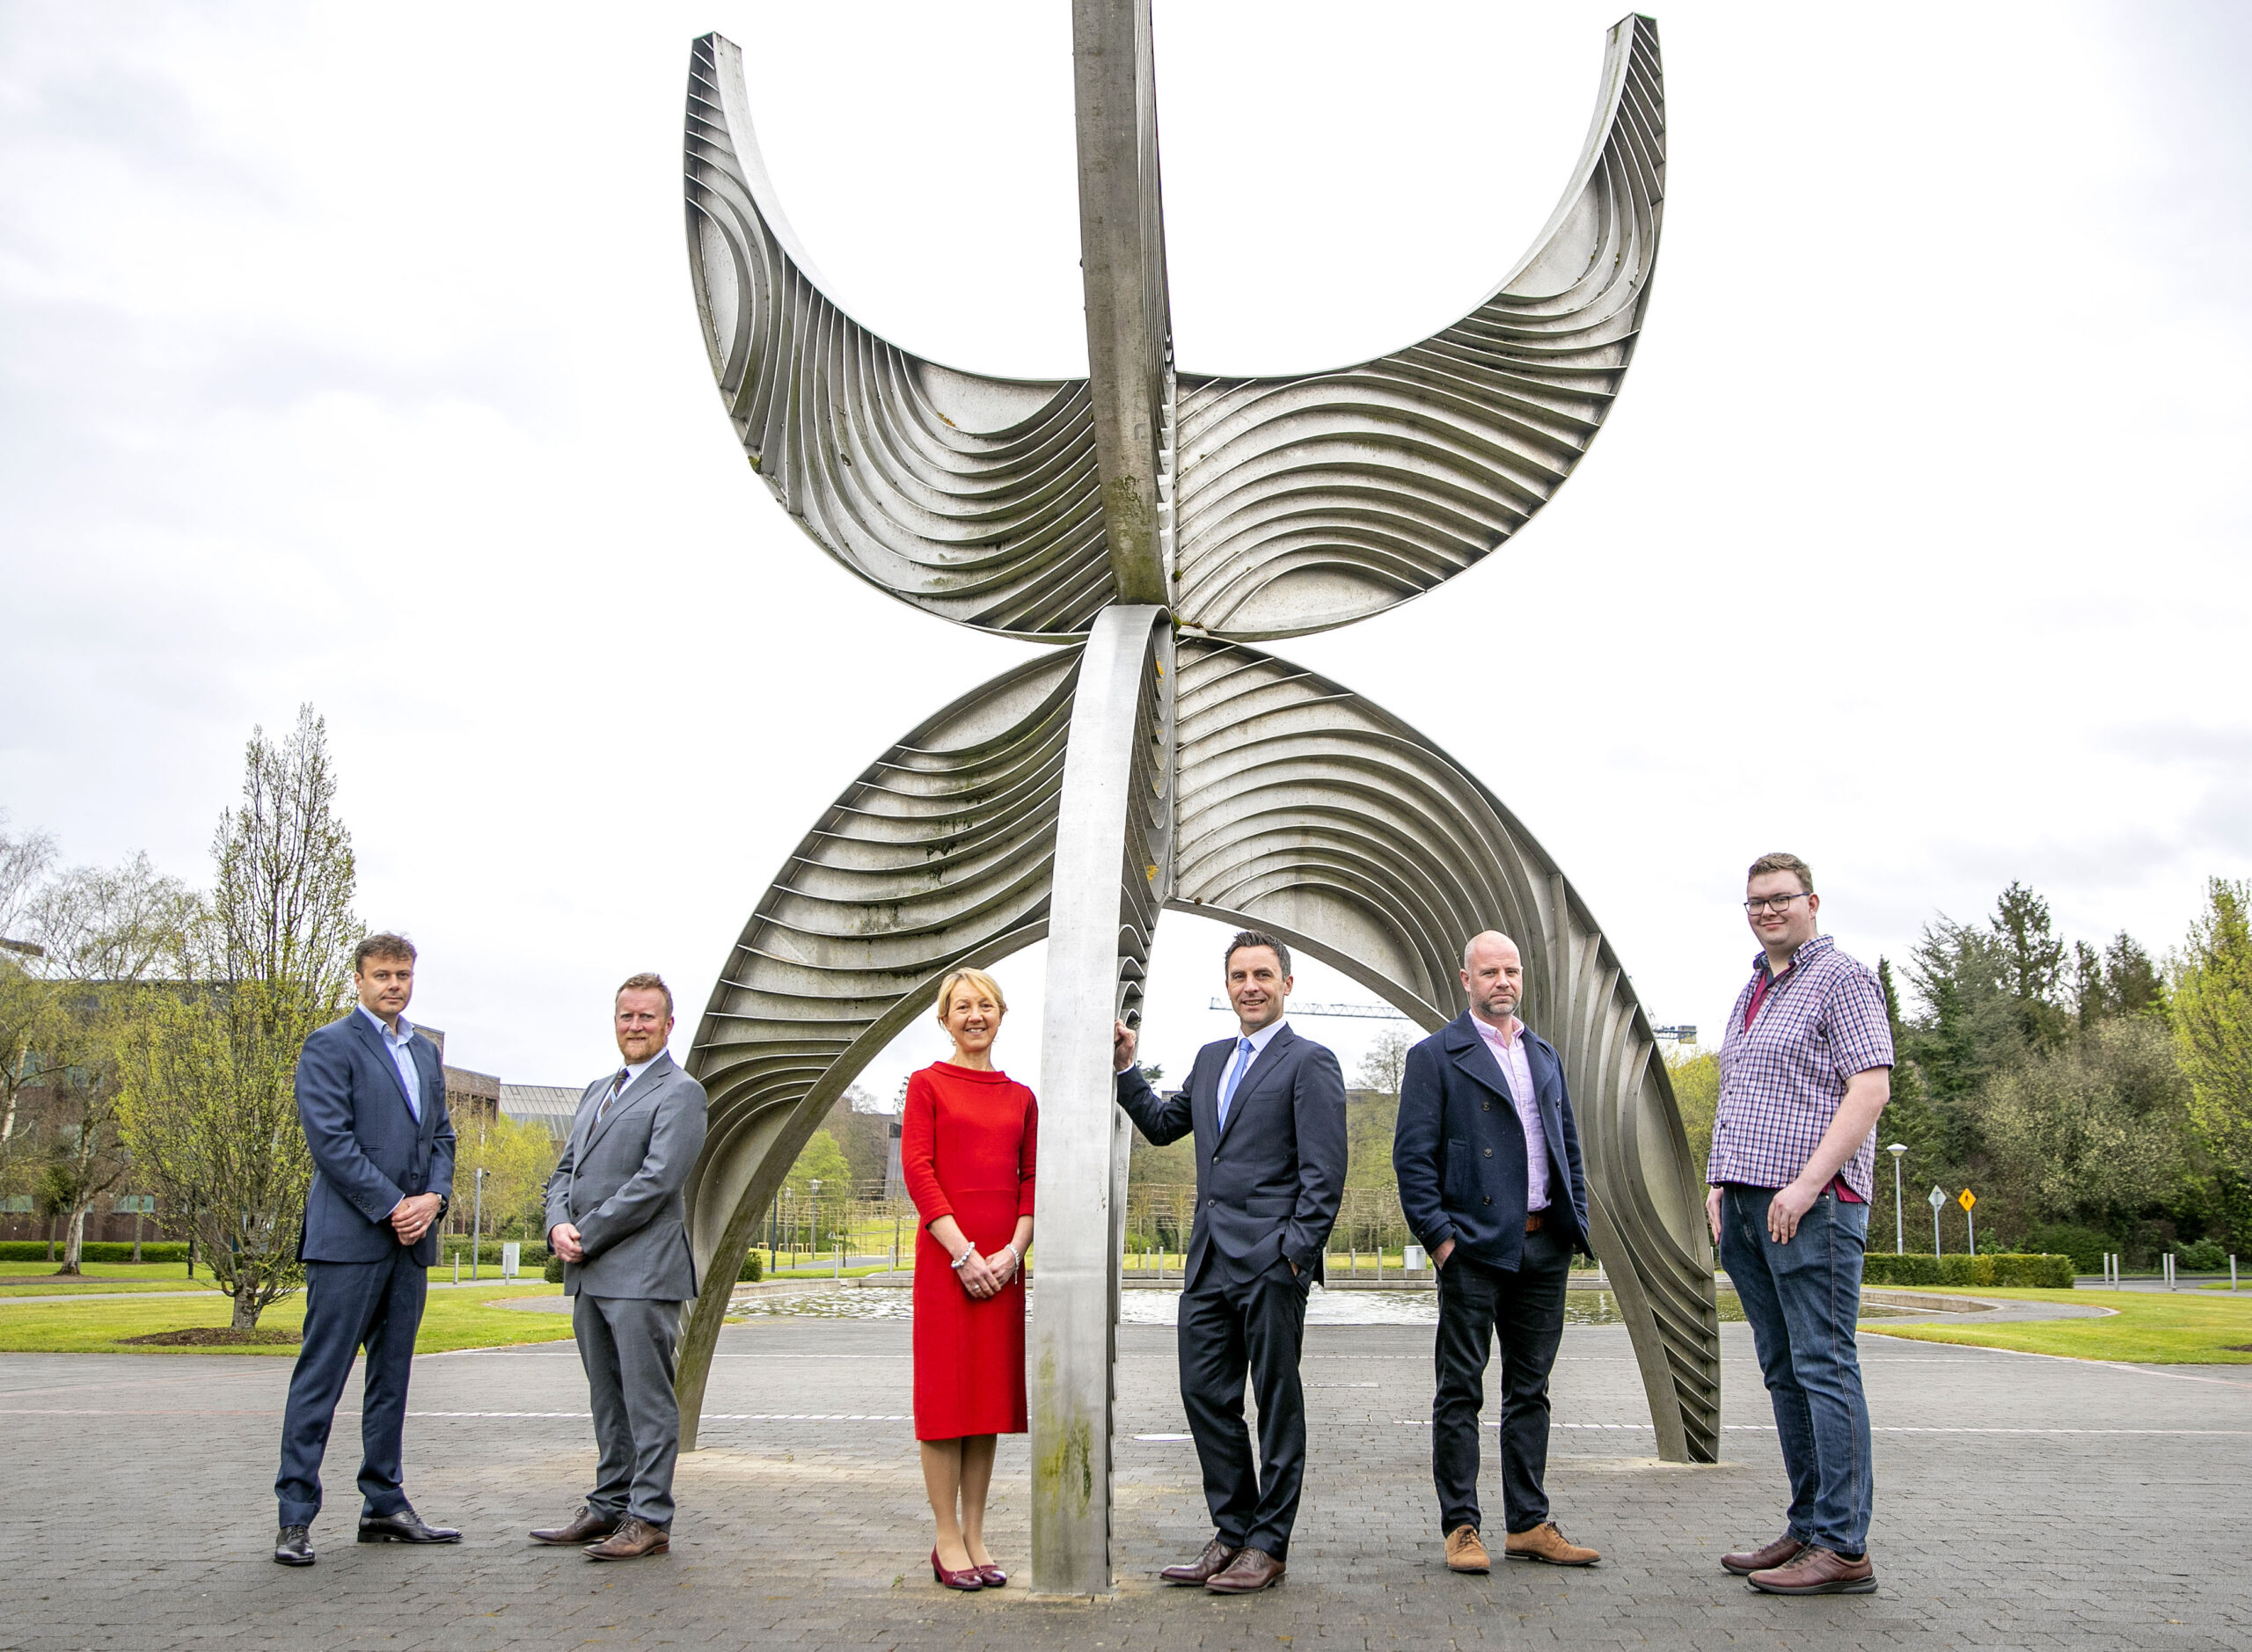 UL Foundation Entrepreneurship The Awards provides a marvelous opportunity for UL students to immerse themselves in a real-world entrepreneurial journey